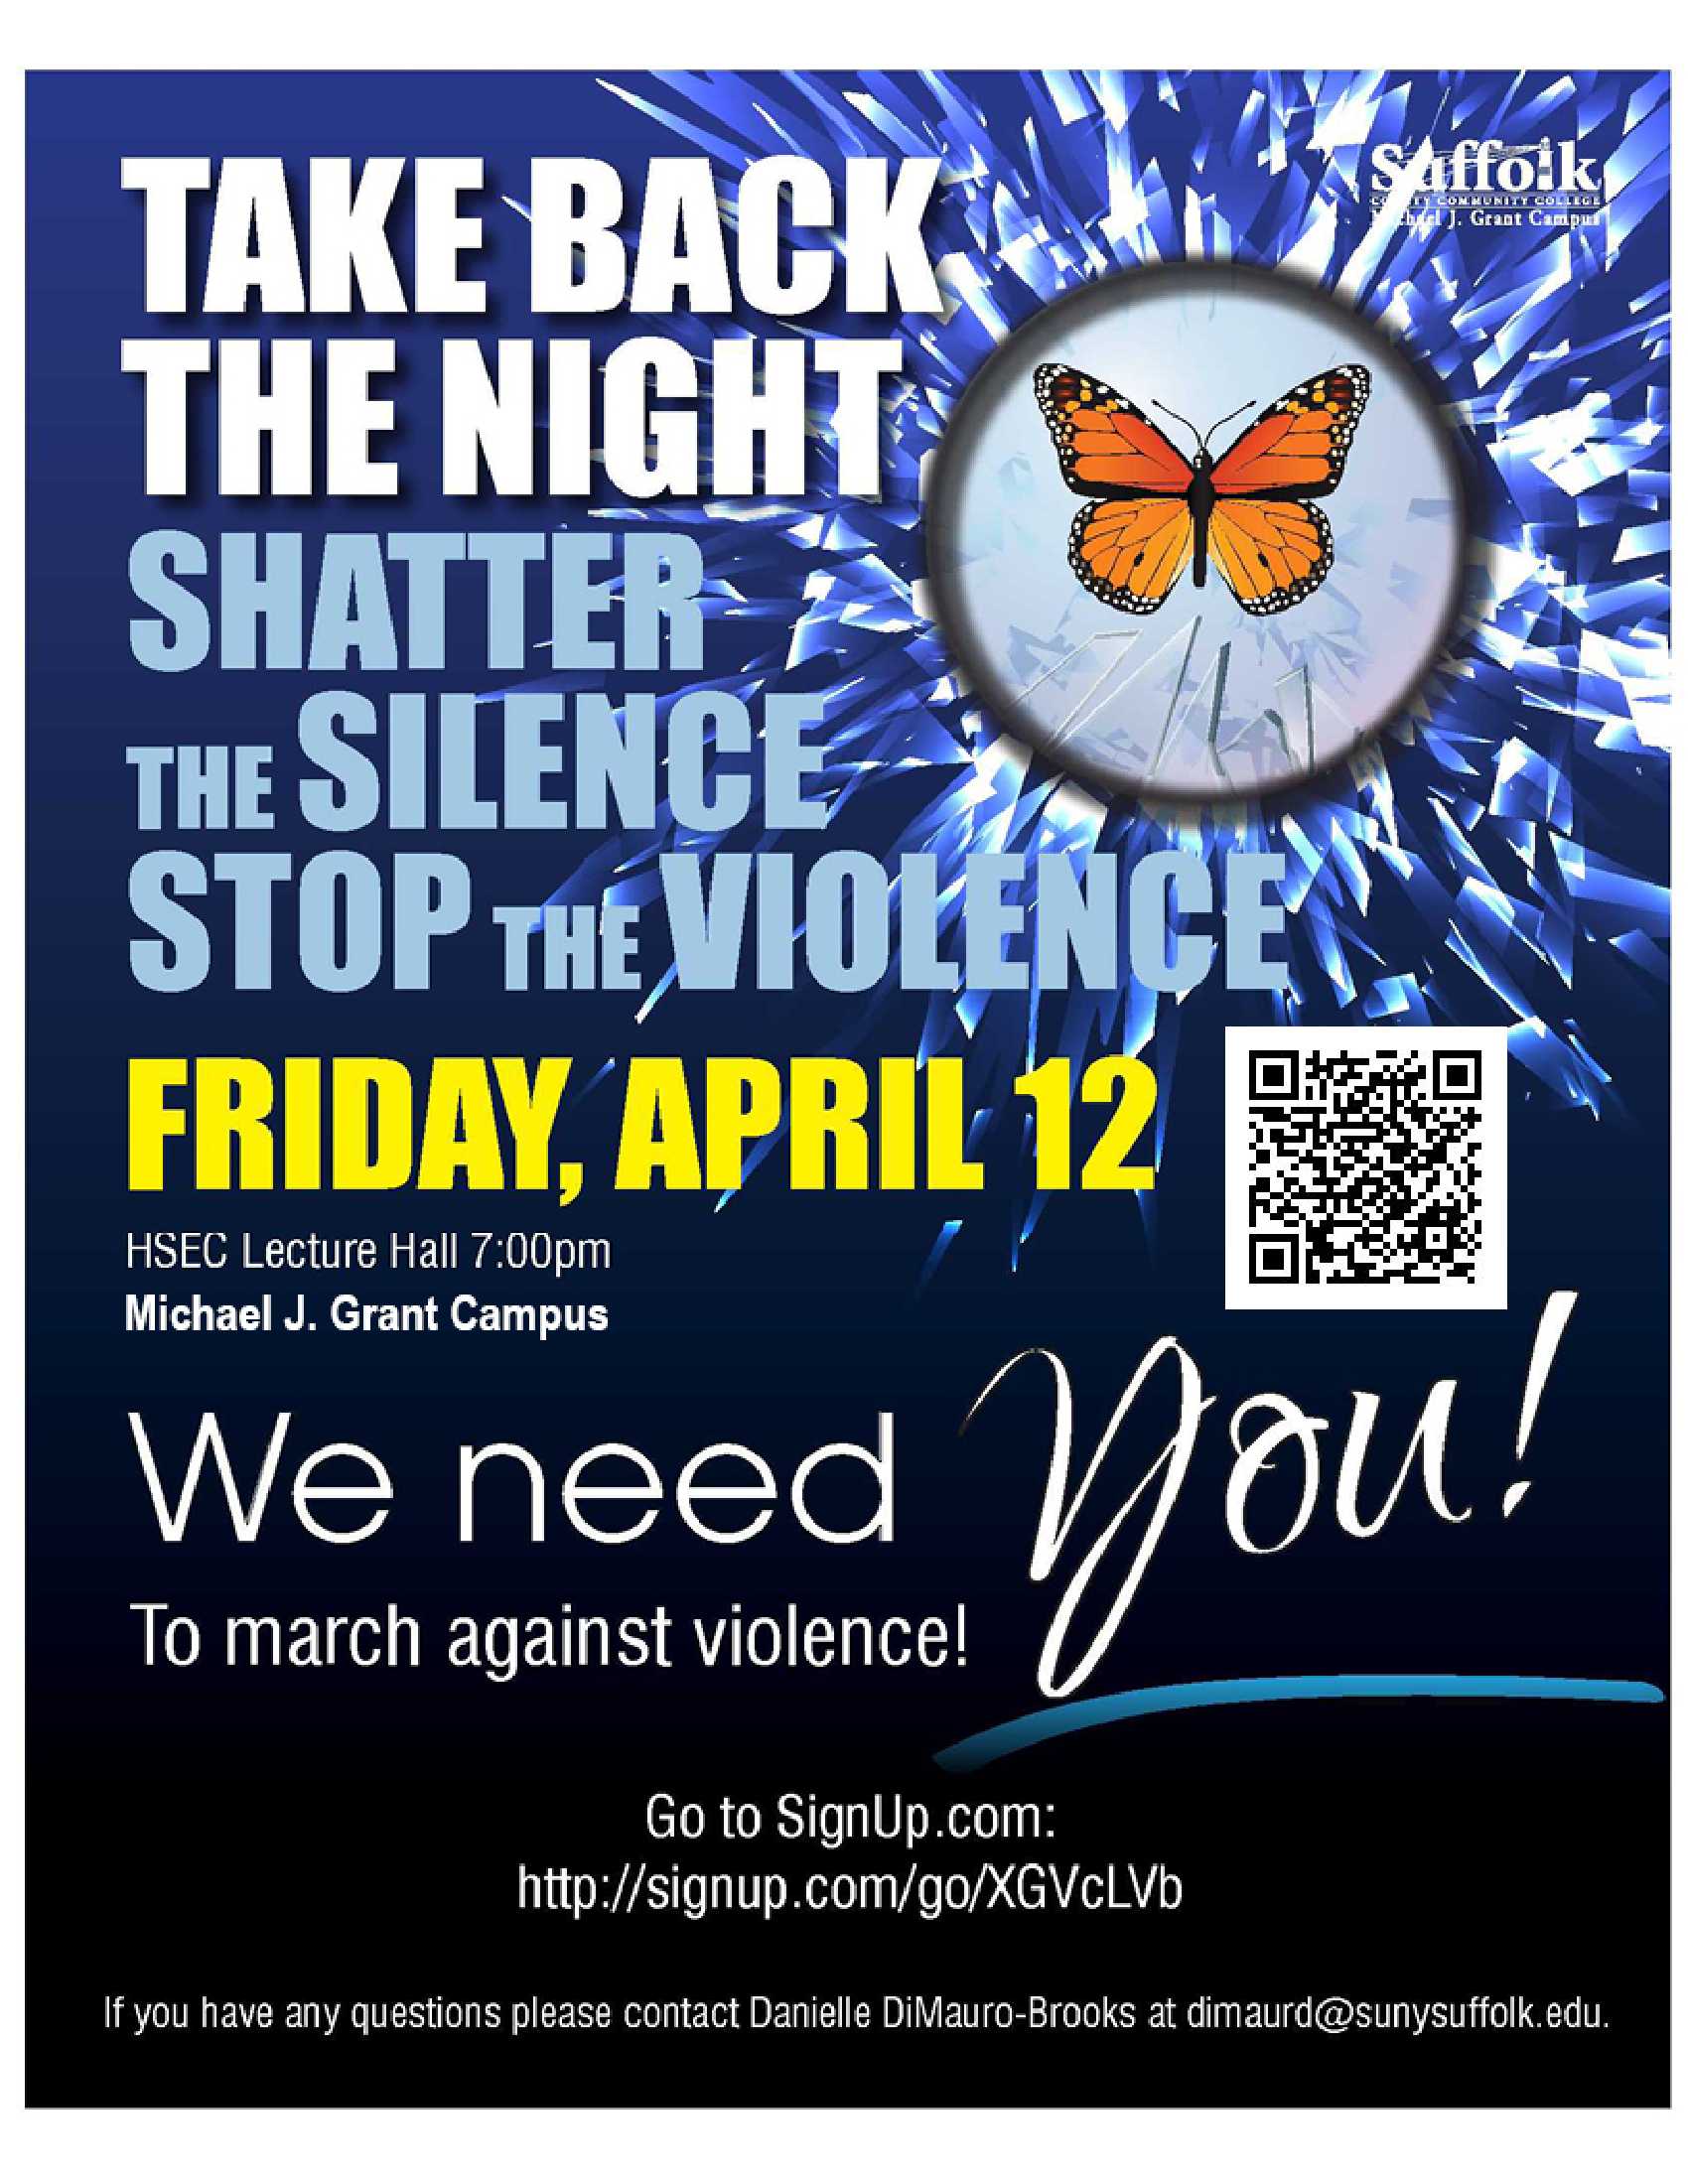 Take Back the Night - Friday, April 12 March Against Violence